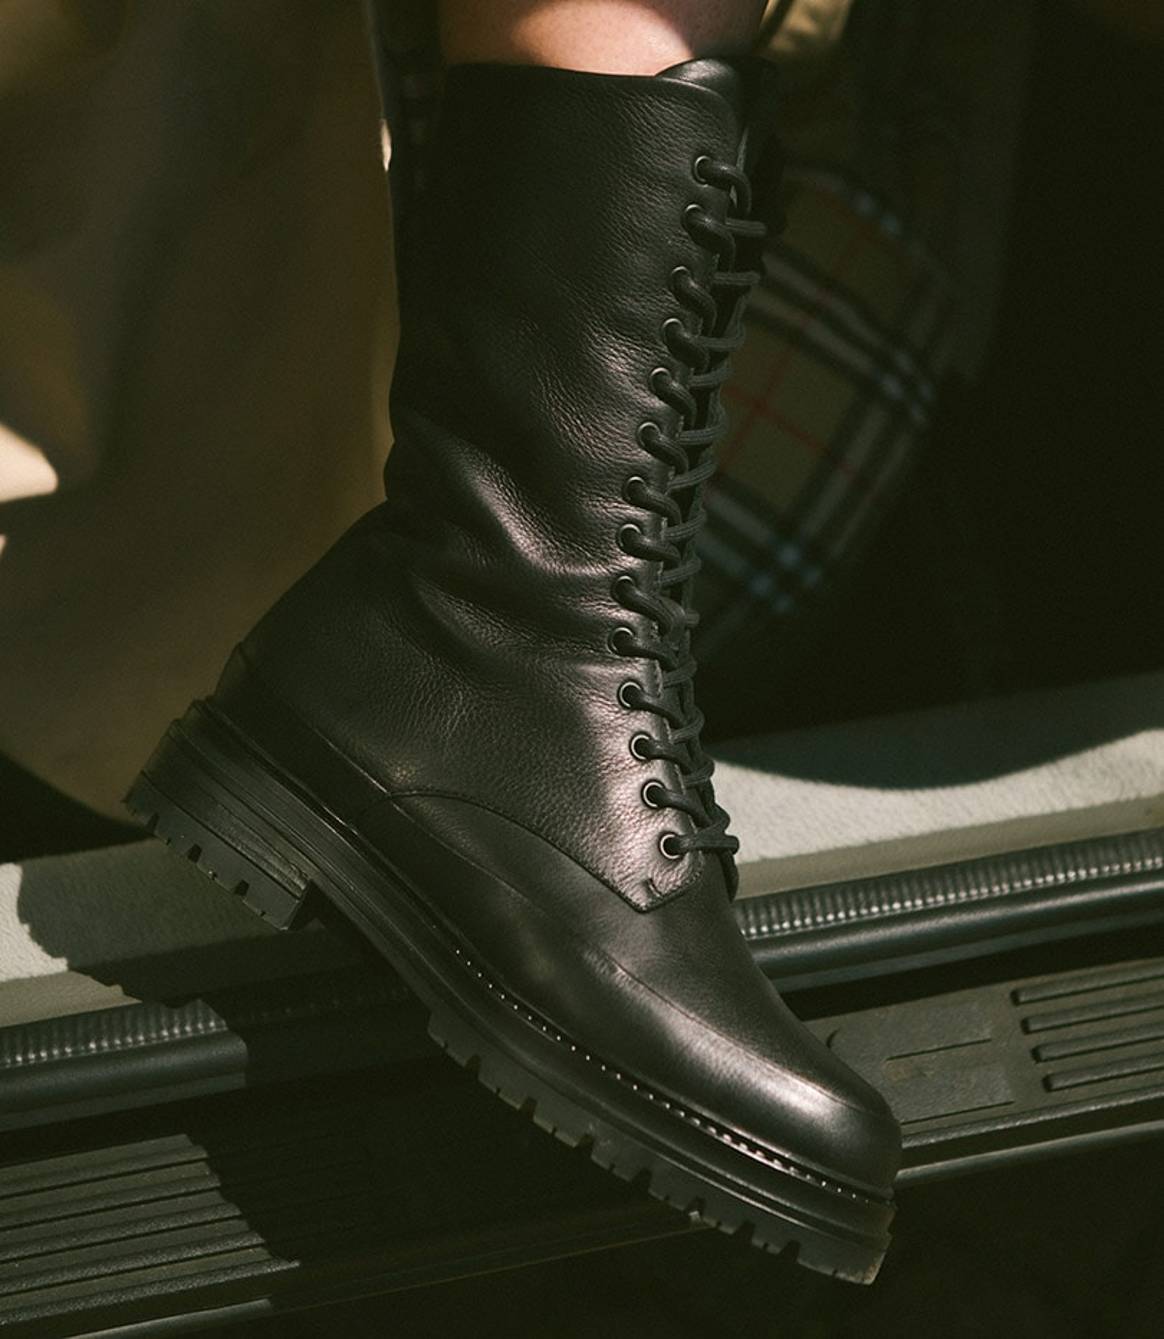 GREYDER LAB AW21 Collection - Made of new innovative materials like cactus leather